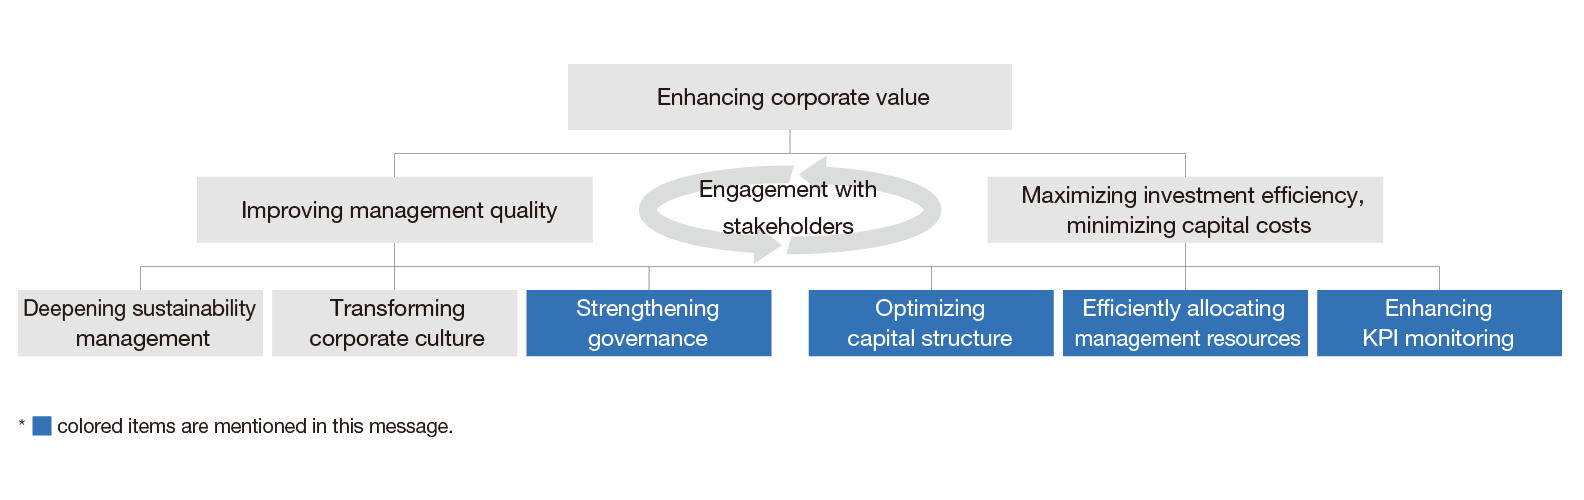 Enhancing corporate value of the Mitsui Chemicals Group, image